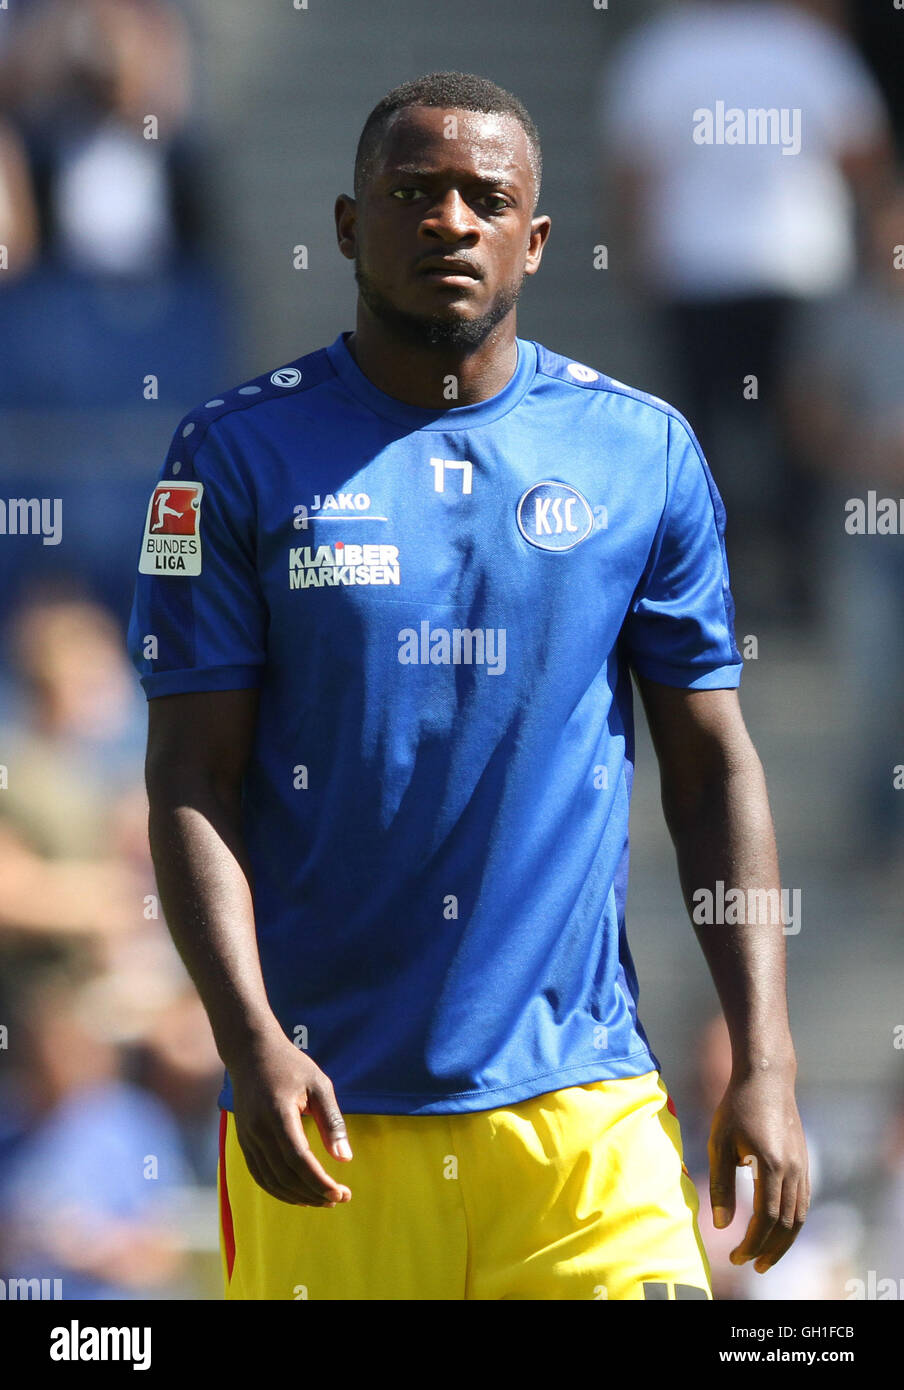 Bielefeld, Germany. 7th Aug, 2016. Karlsruhe's David Kinsombi warms up before the match of the 2nd Bundesliga Soccer match between Arminia Bielefeld and Karlsruher SC at Schueco Arena in Bielefeld, Germany, 7 August 2016. PHOTO: OLIVER KRATO/dpa/Alamy Live News Stock Photo